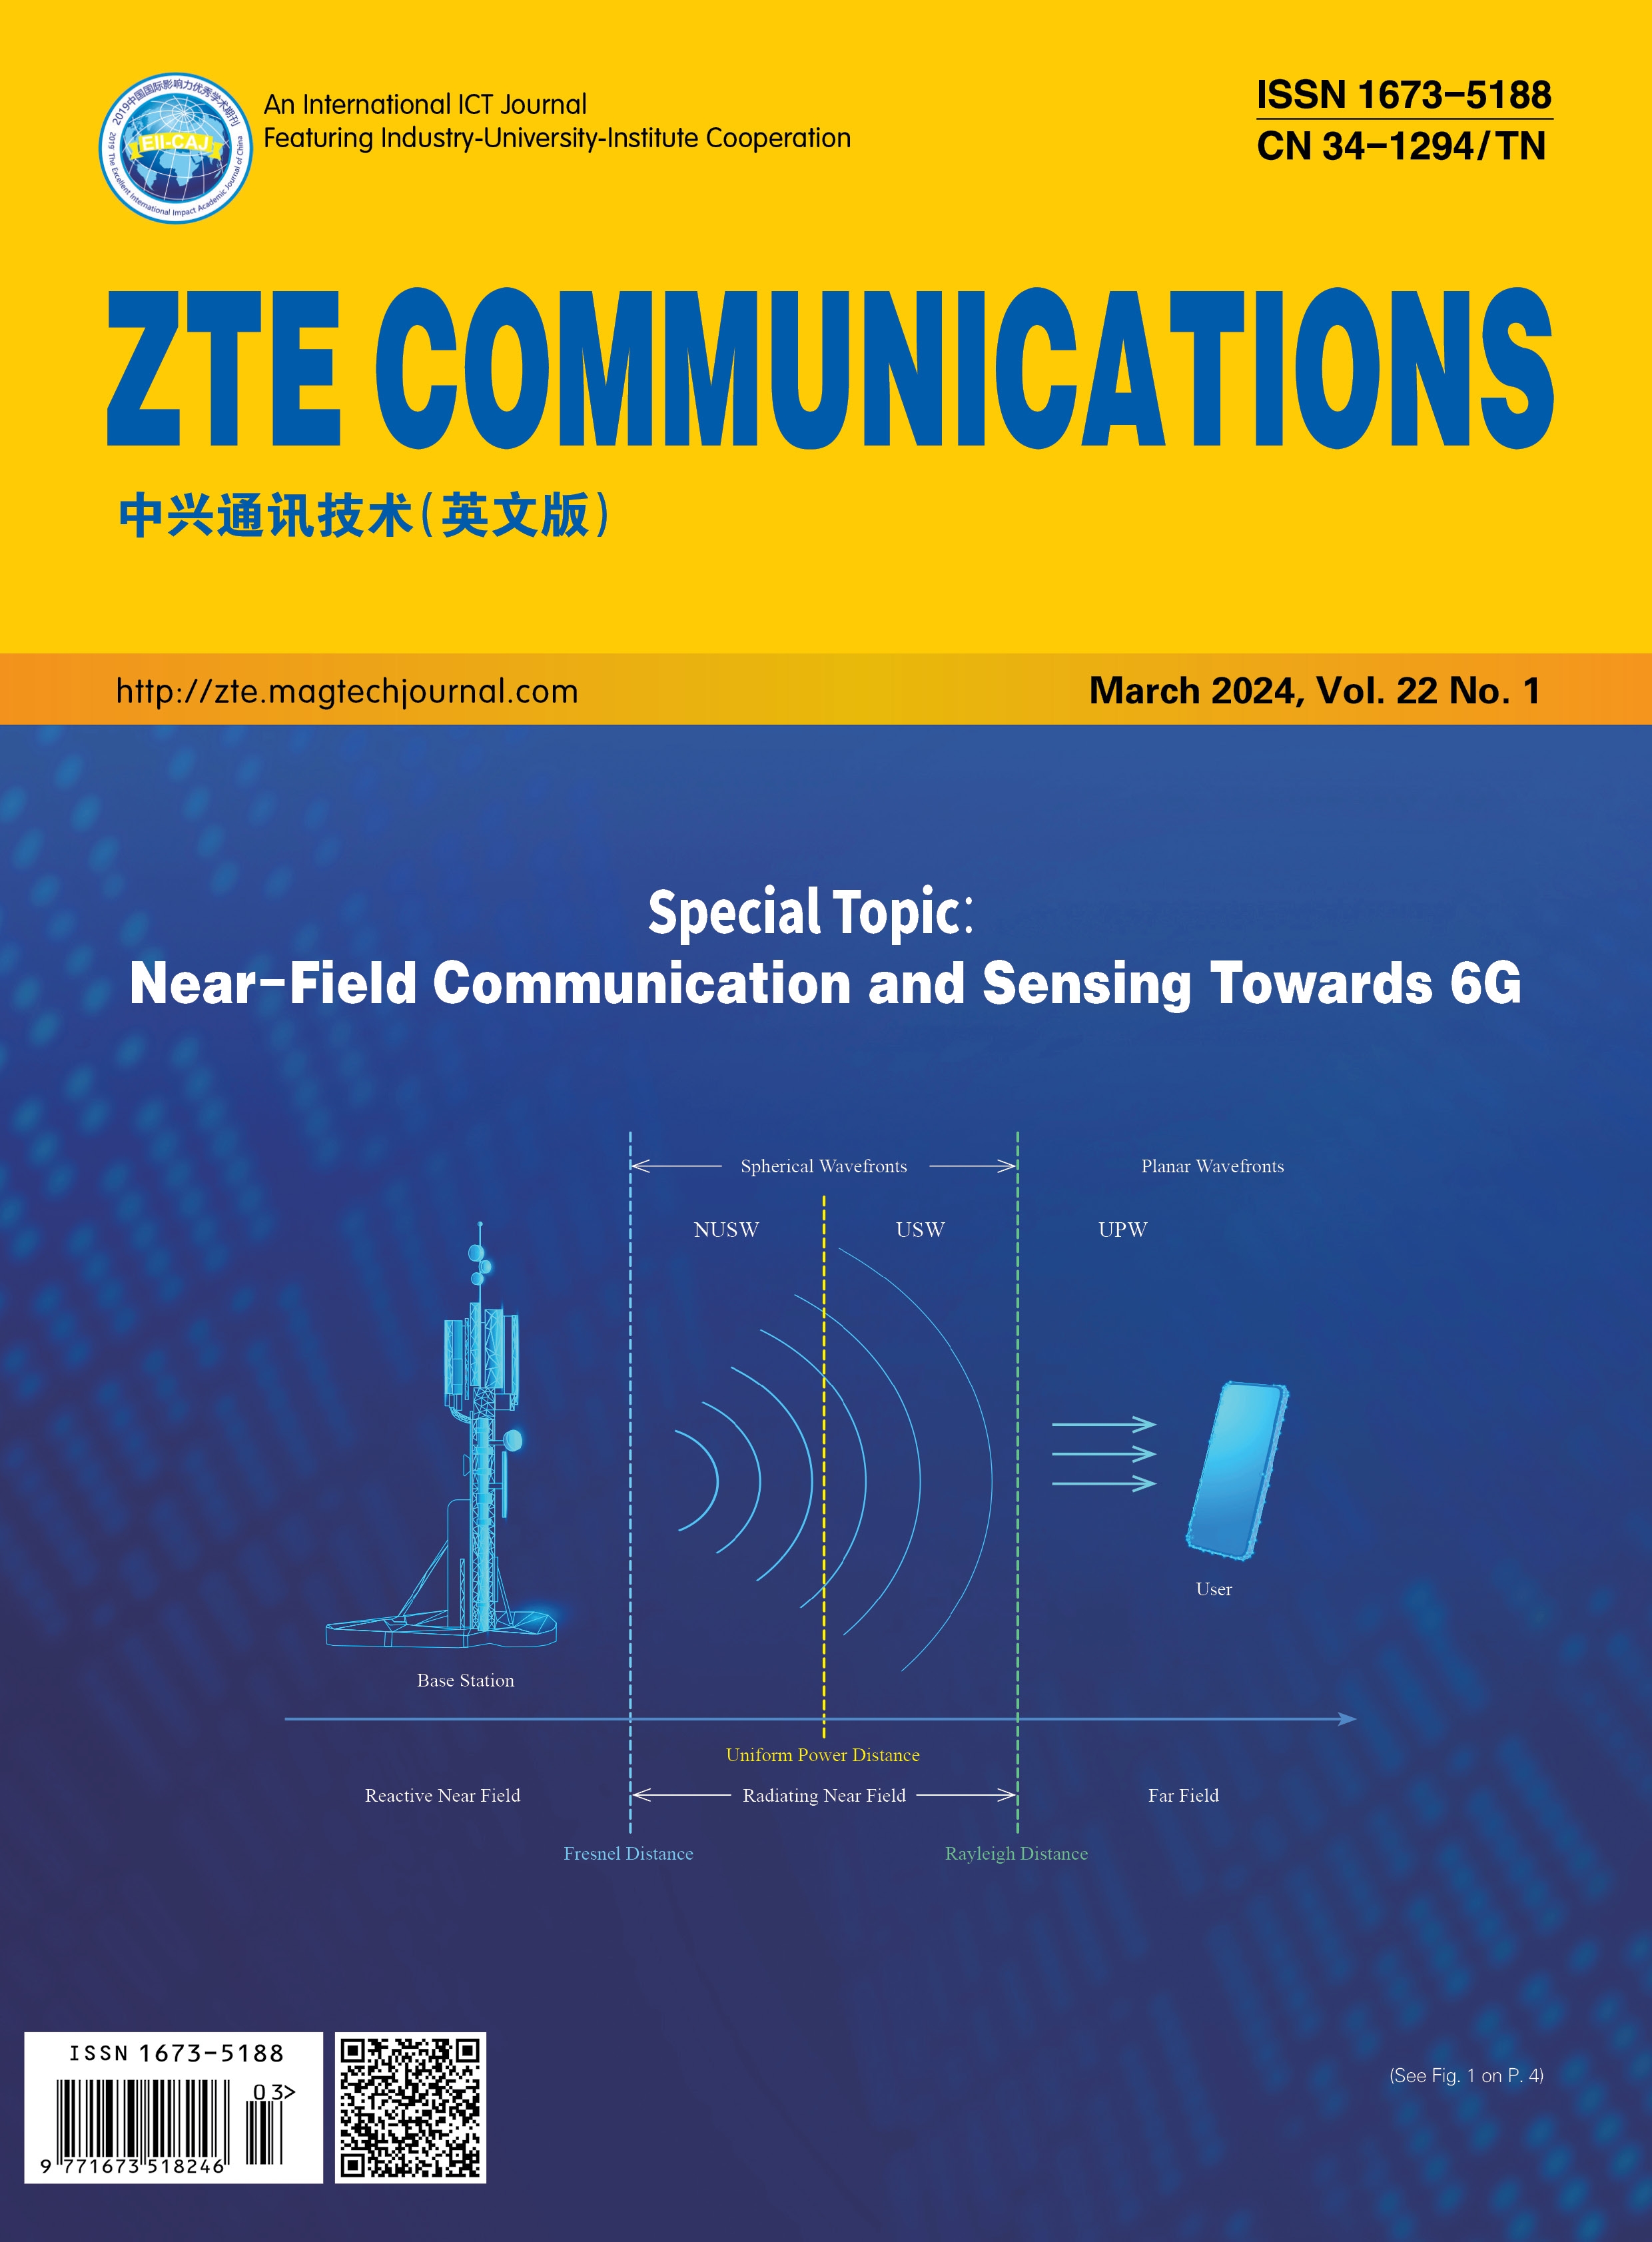 Special Topic on Near-Field Communications and Sensing Towards 6G